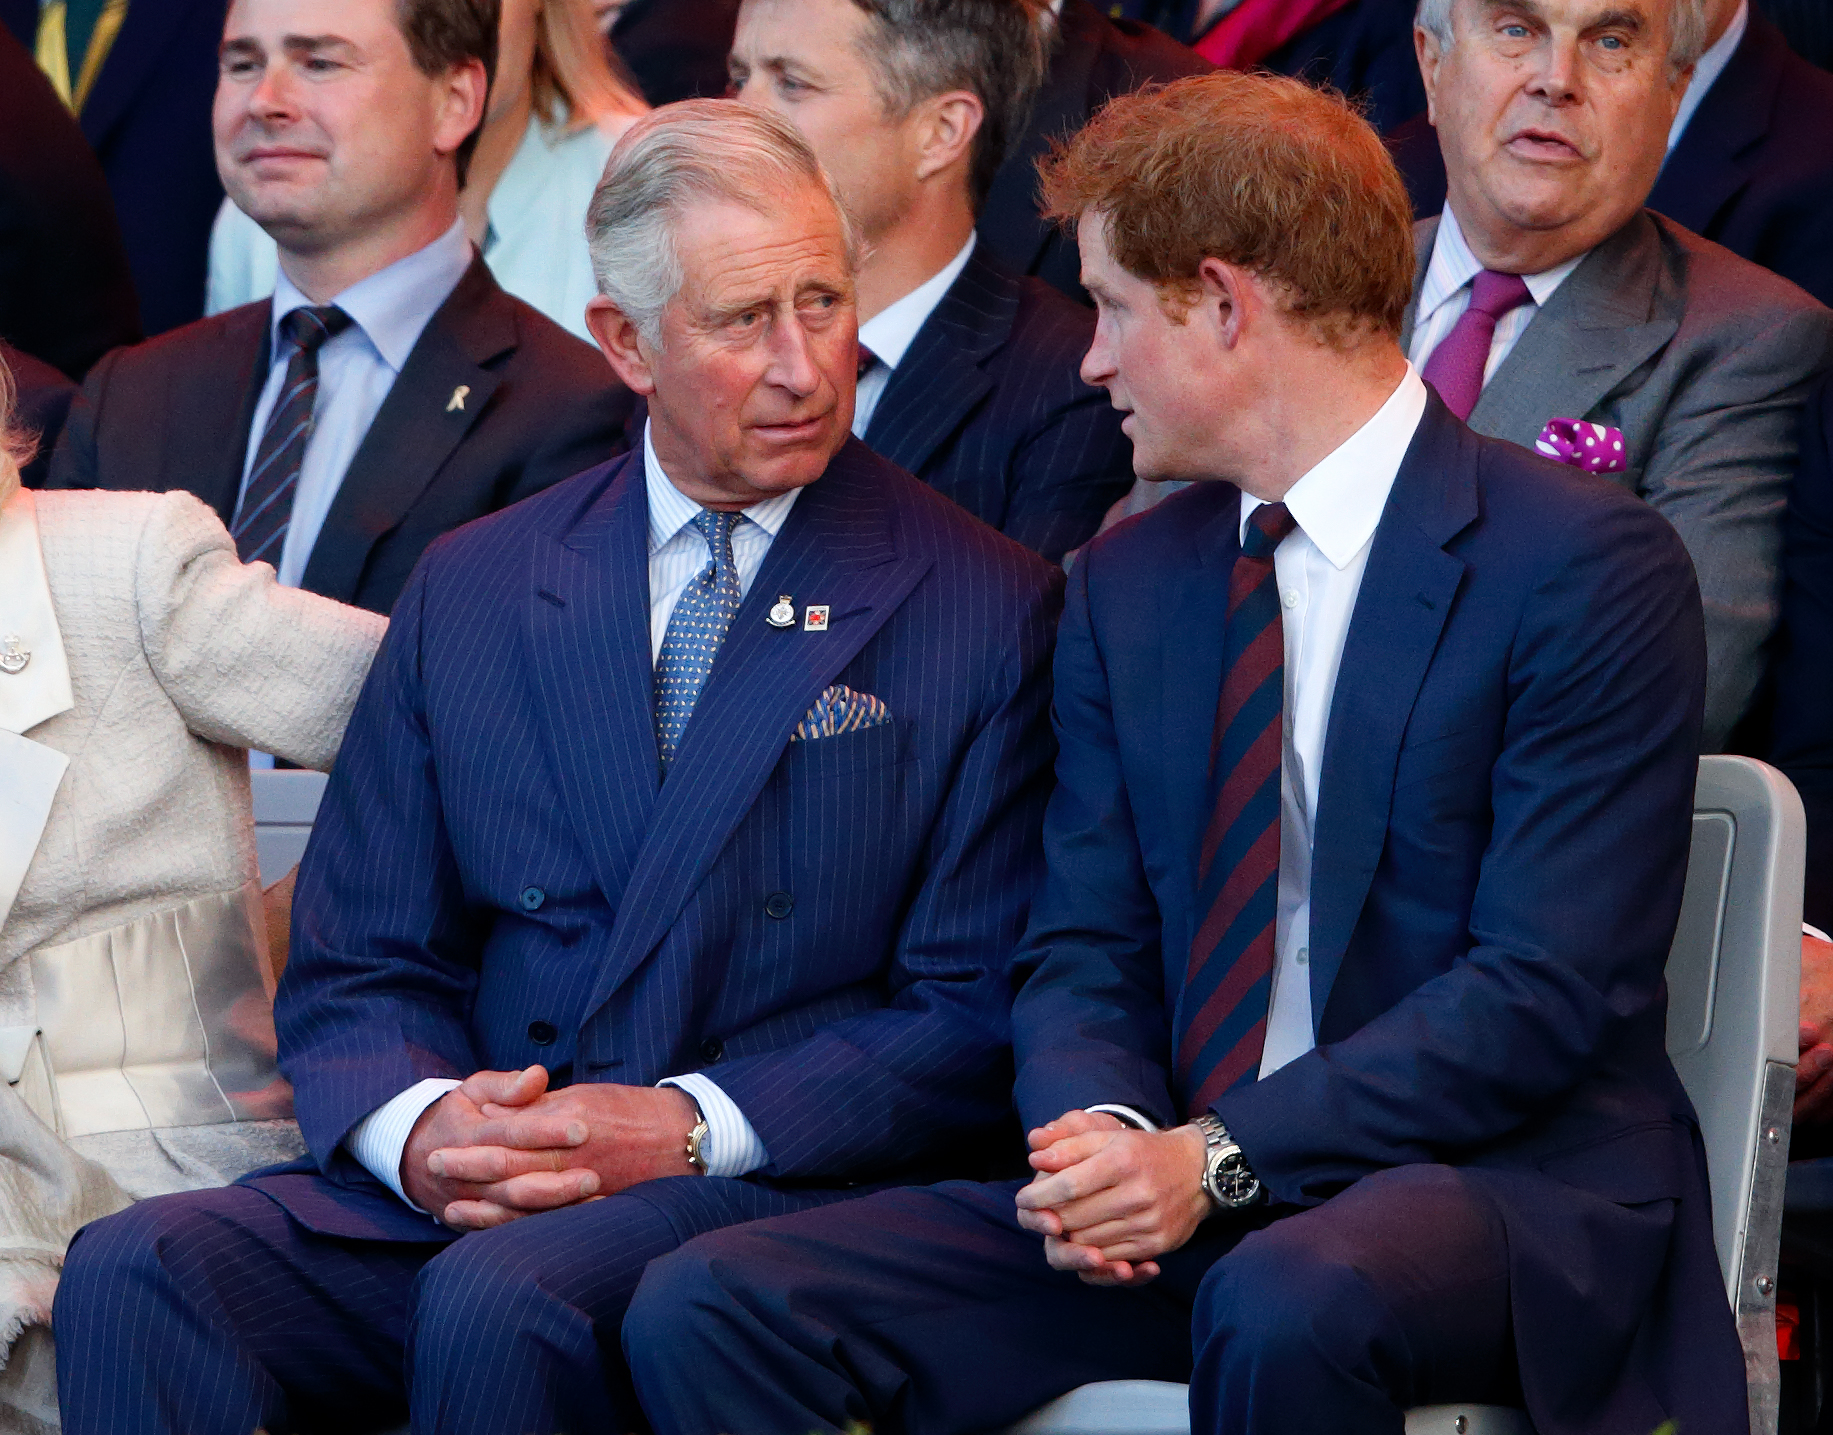 King Charles III and Prince Harry having a conversation during the Opening Ceremony of the Invictus Games in London, England on September 10, 2014 | Source: Getty Images